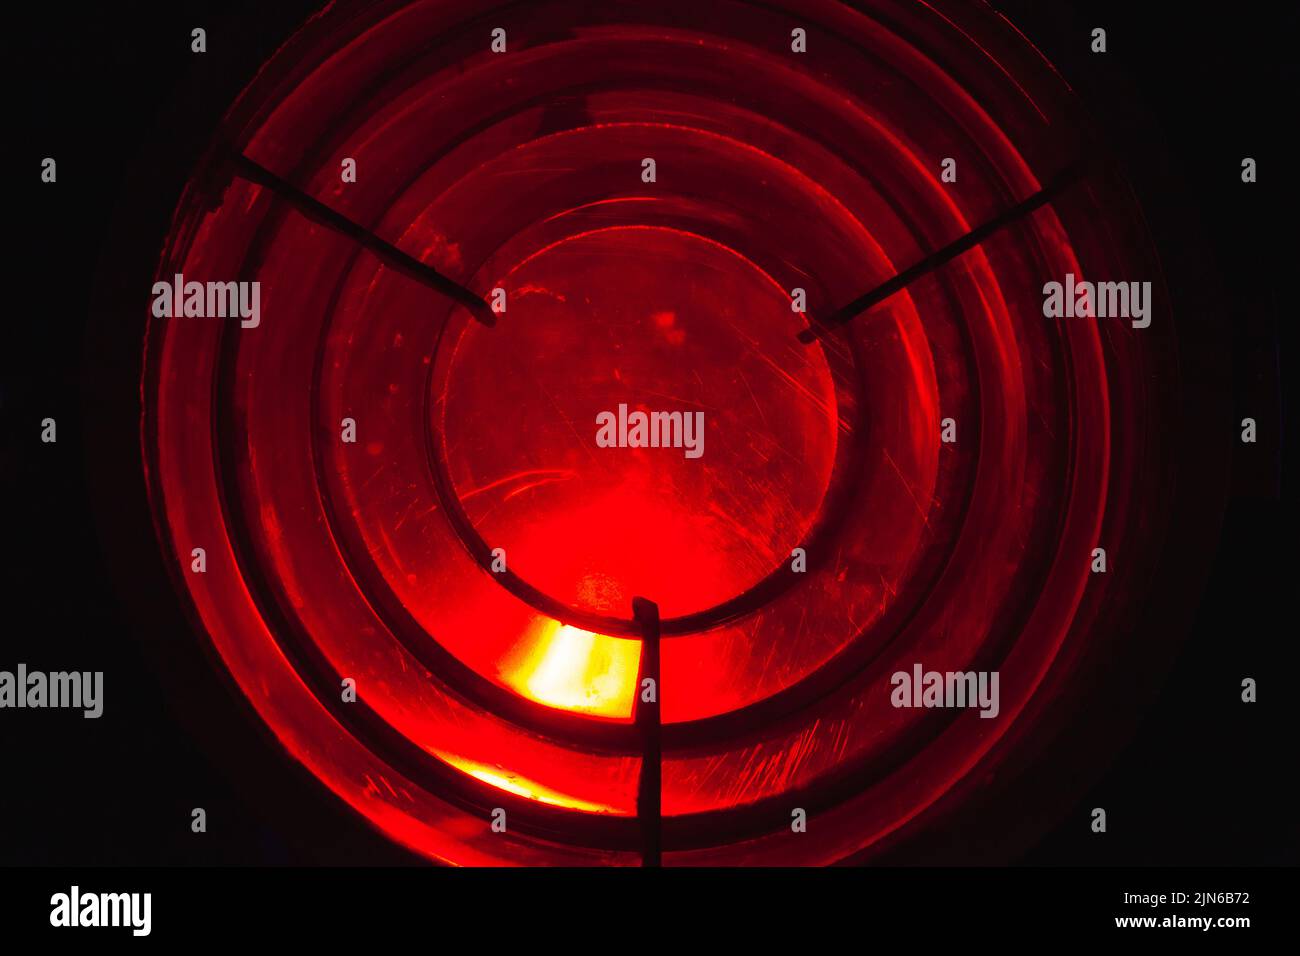 Red leading light is behind a Fresnel lens. It is a type of composite compact lens developed by the French physicist Augustin-Jean Fresnel for use in Stock Photo